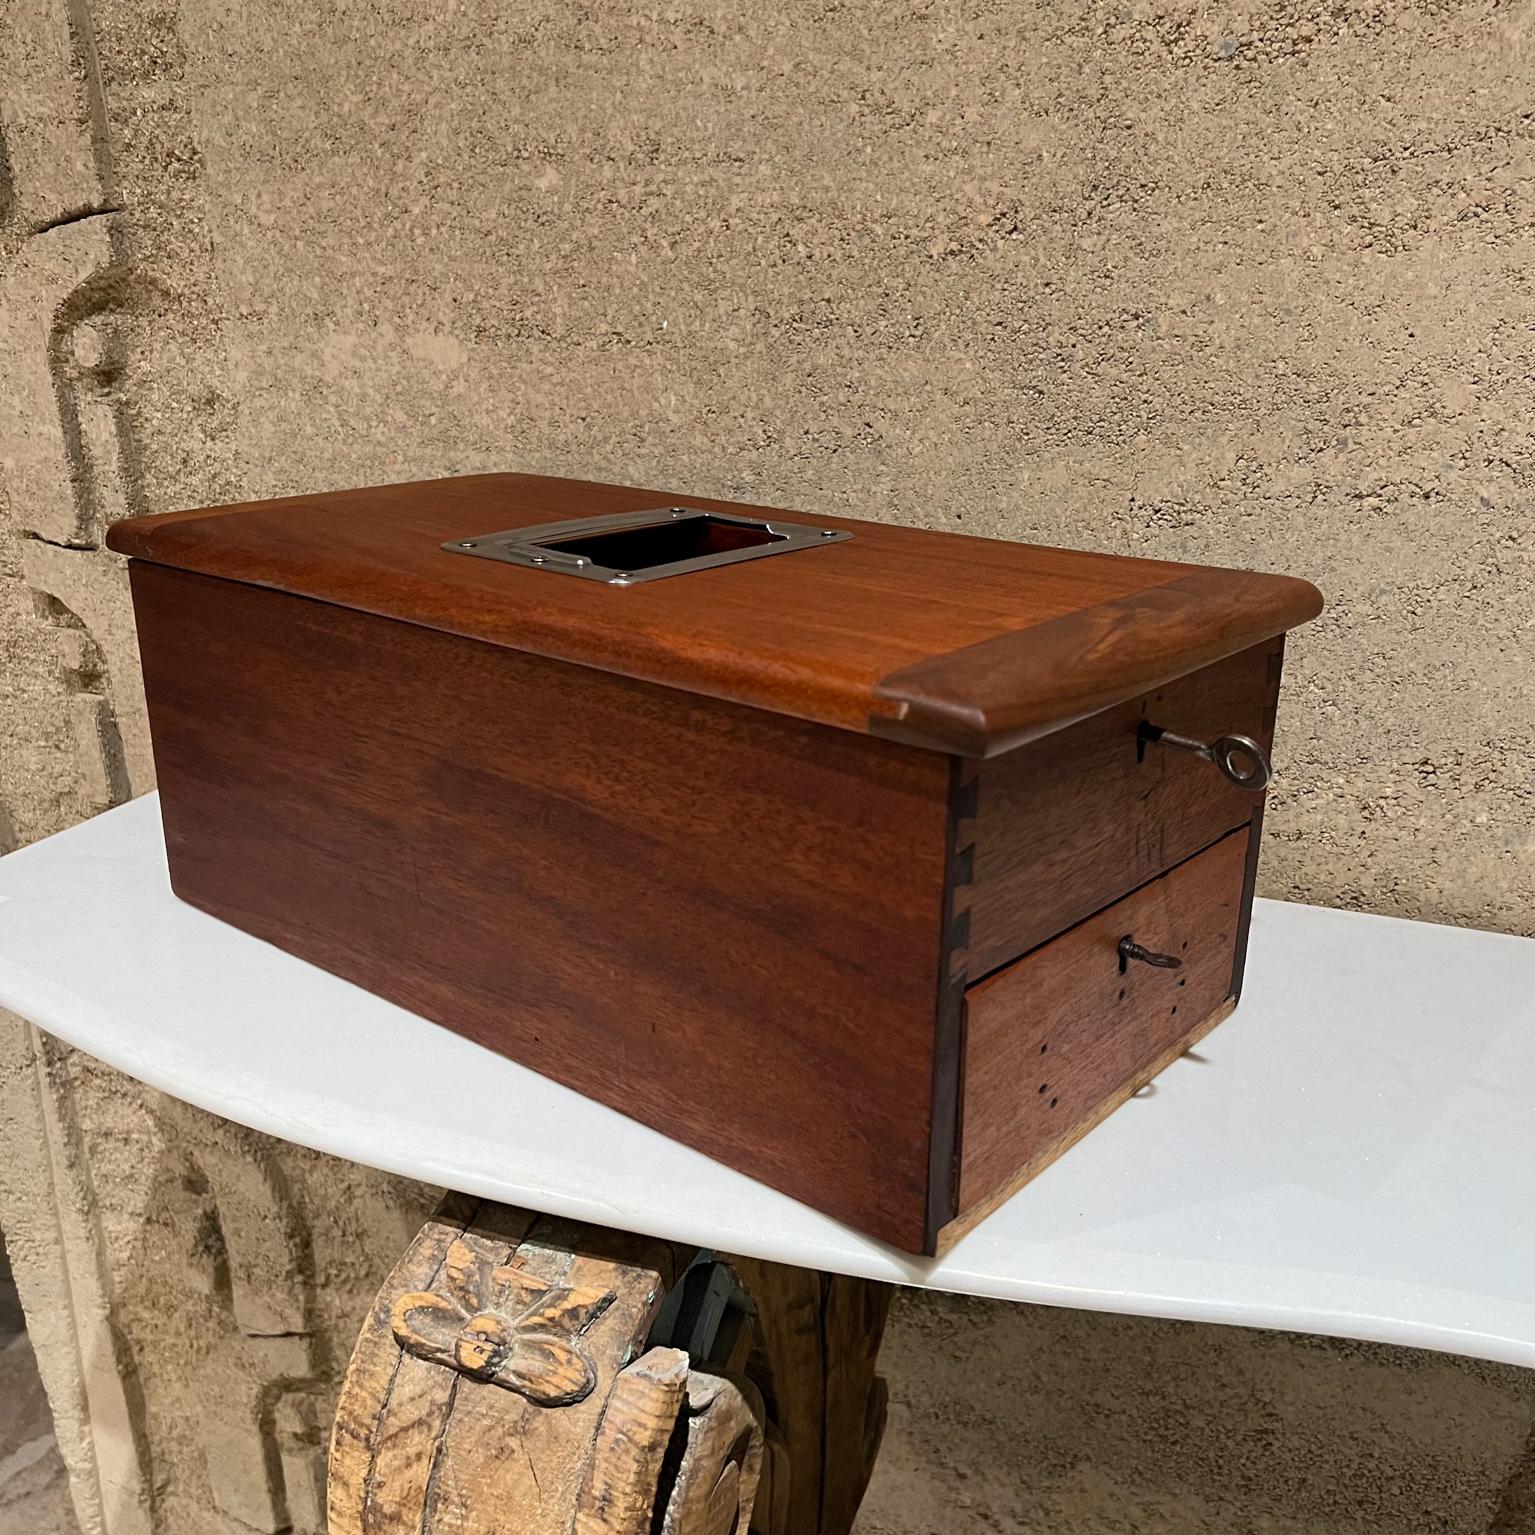 1920s Elegant antique wood money box USA (pre–ATM Venmo PayPal!)
Beautiful craftsmanship
Measures: 7 tall x 9.25 width x 17.5 depth
Solid wood with chrome plated window cover. It has two keys.
Tested and working.
Original finish was refreshed.